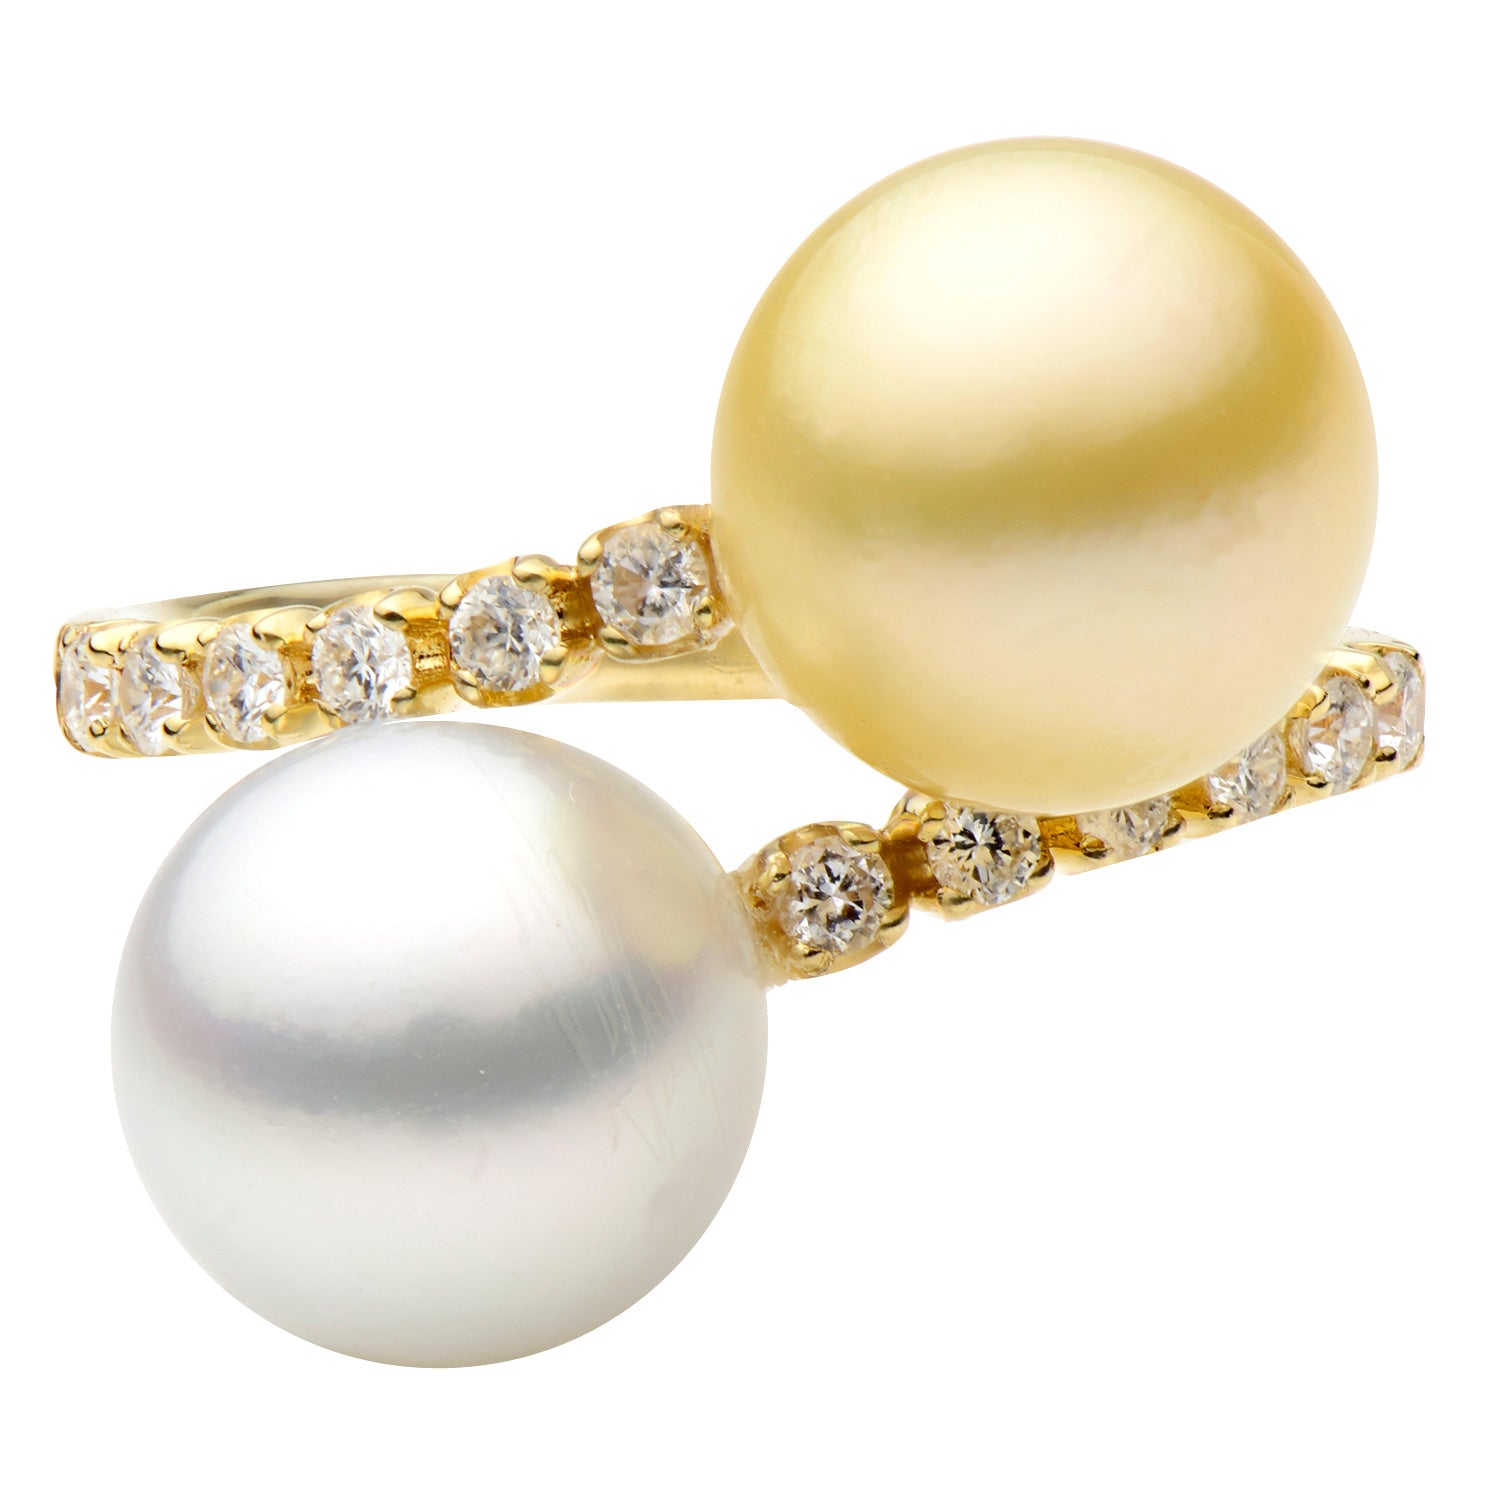 18K Yellow Gold White & Golden South Sea Pearl Spiral Diamond Ring, 14-15mm